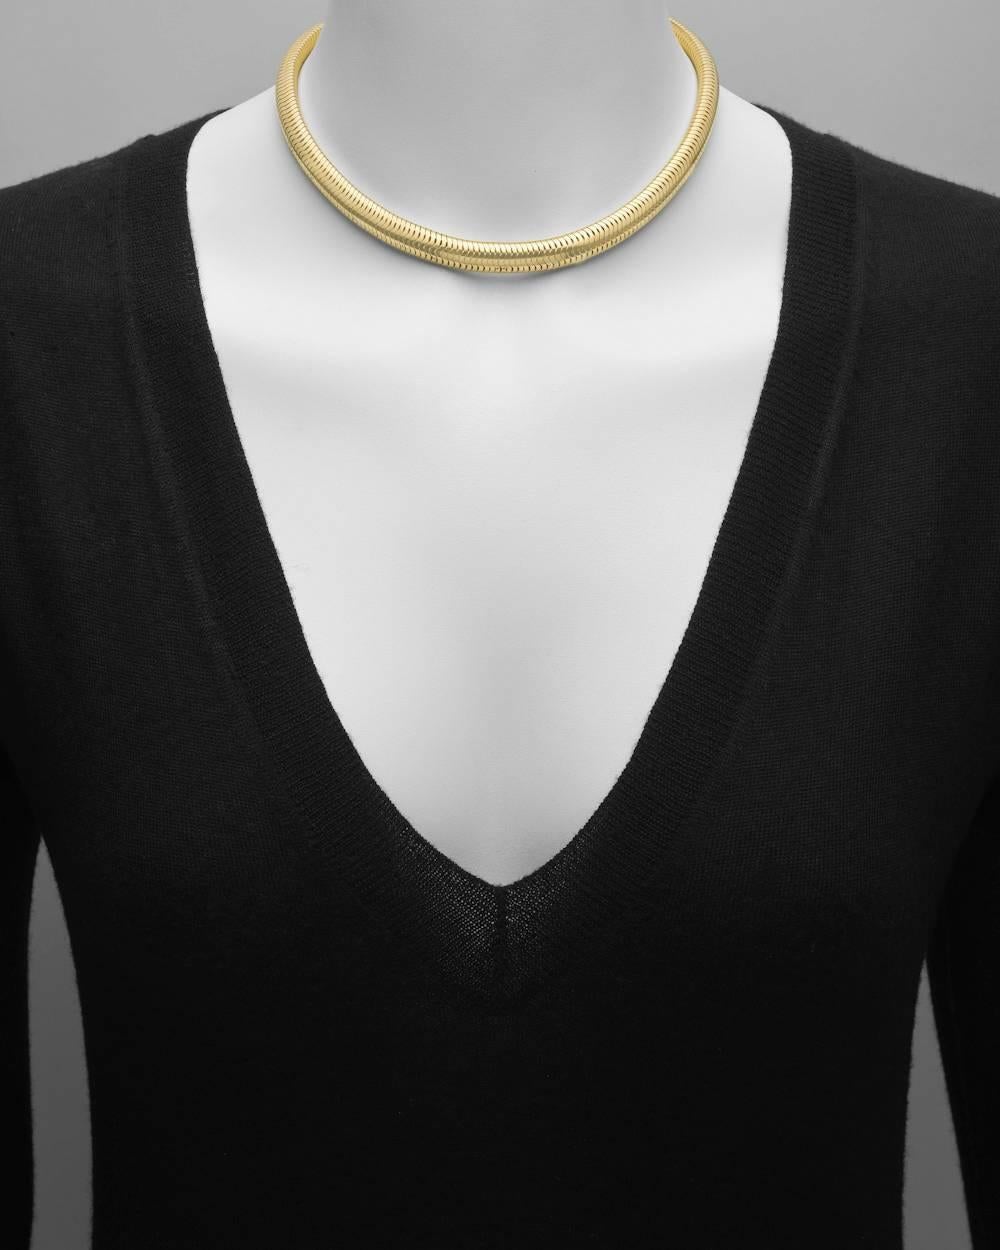 Tubogas style necklace in 14k yellow gold. 15.5